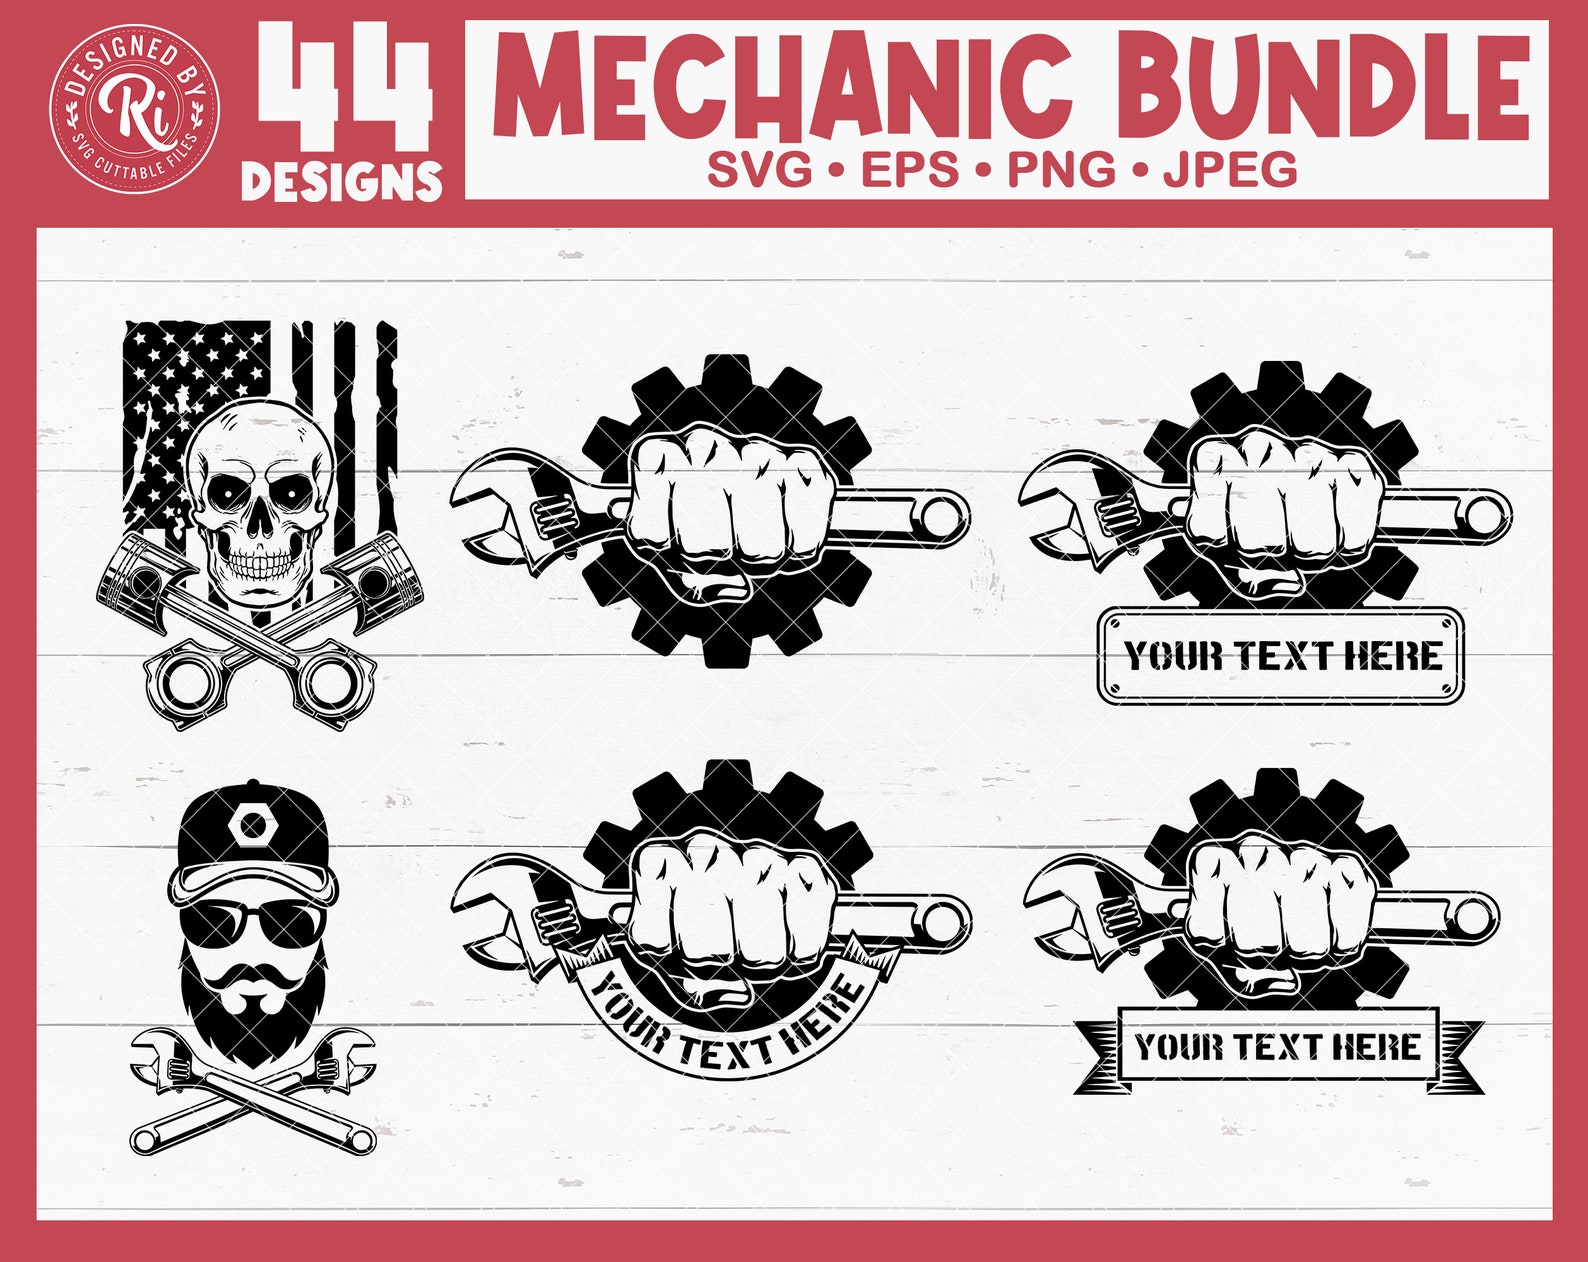 It's a mechanic bundle with 44 designed motorcycle illustration.